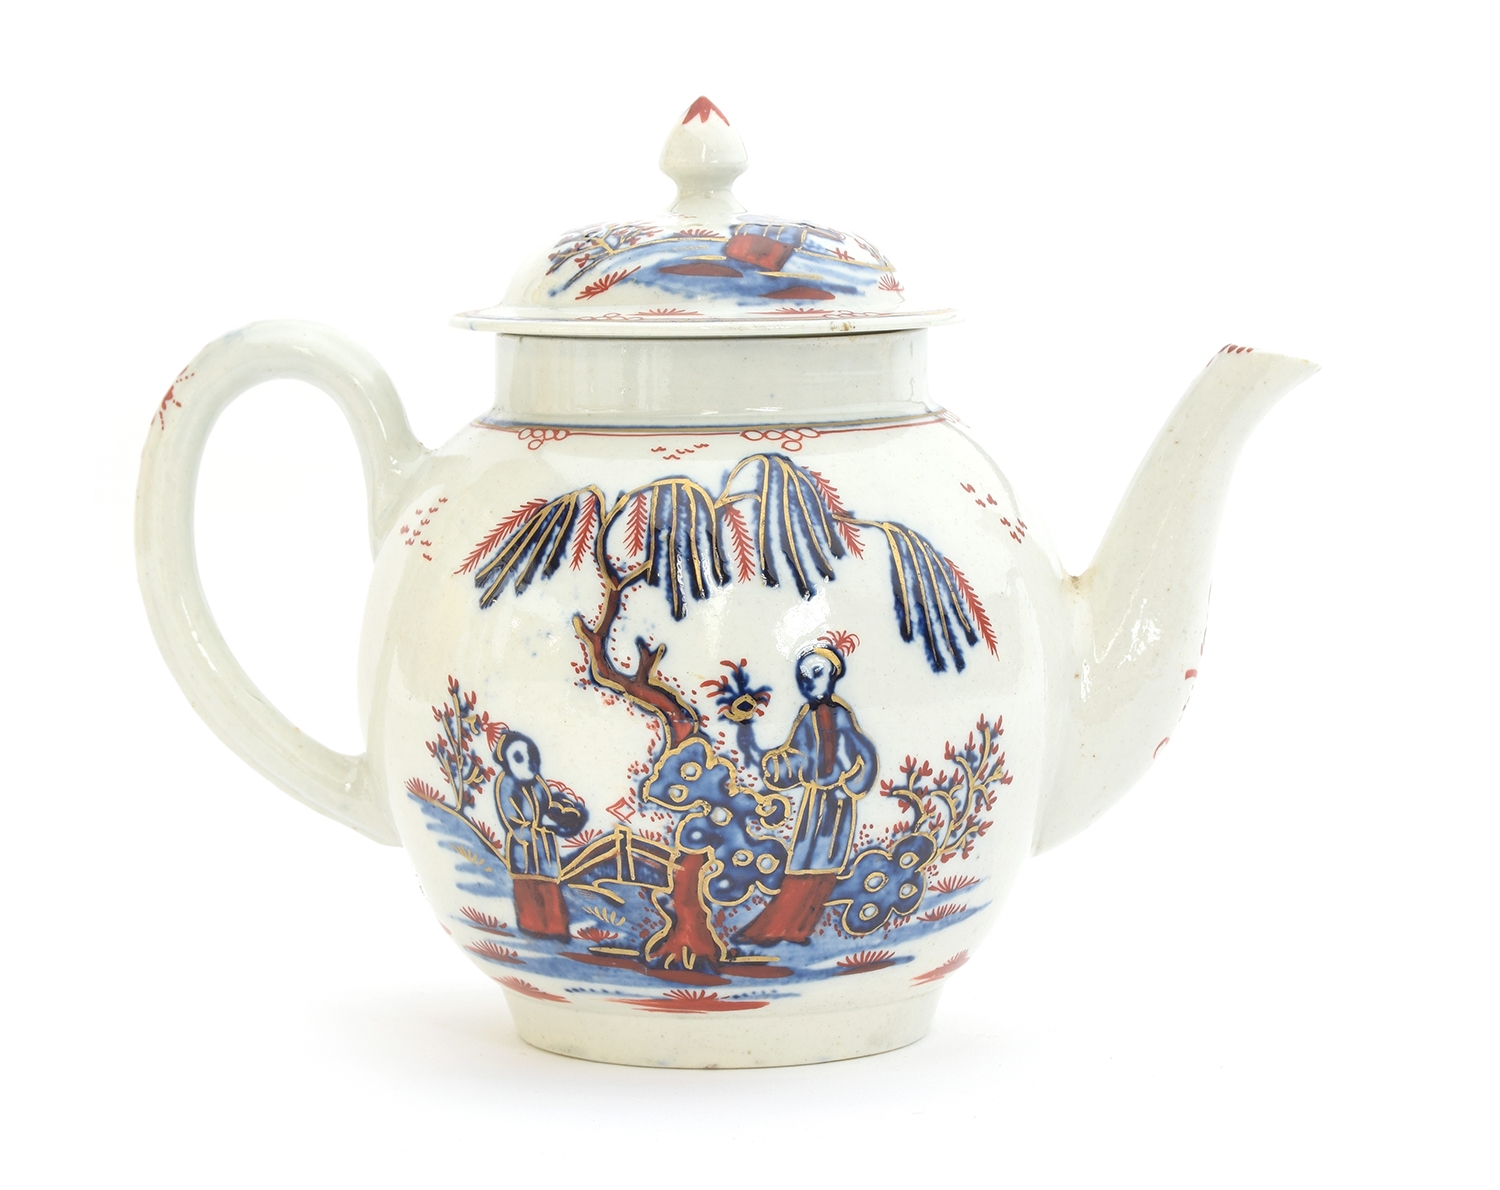 A late 18th century Liverpool Seth Pennington teapot and cover c.1780, 'Lady and Servant' pattern,